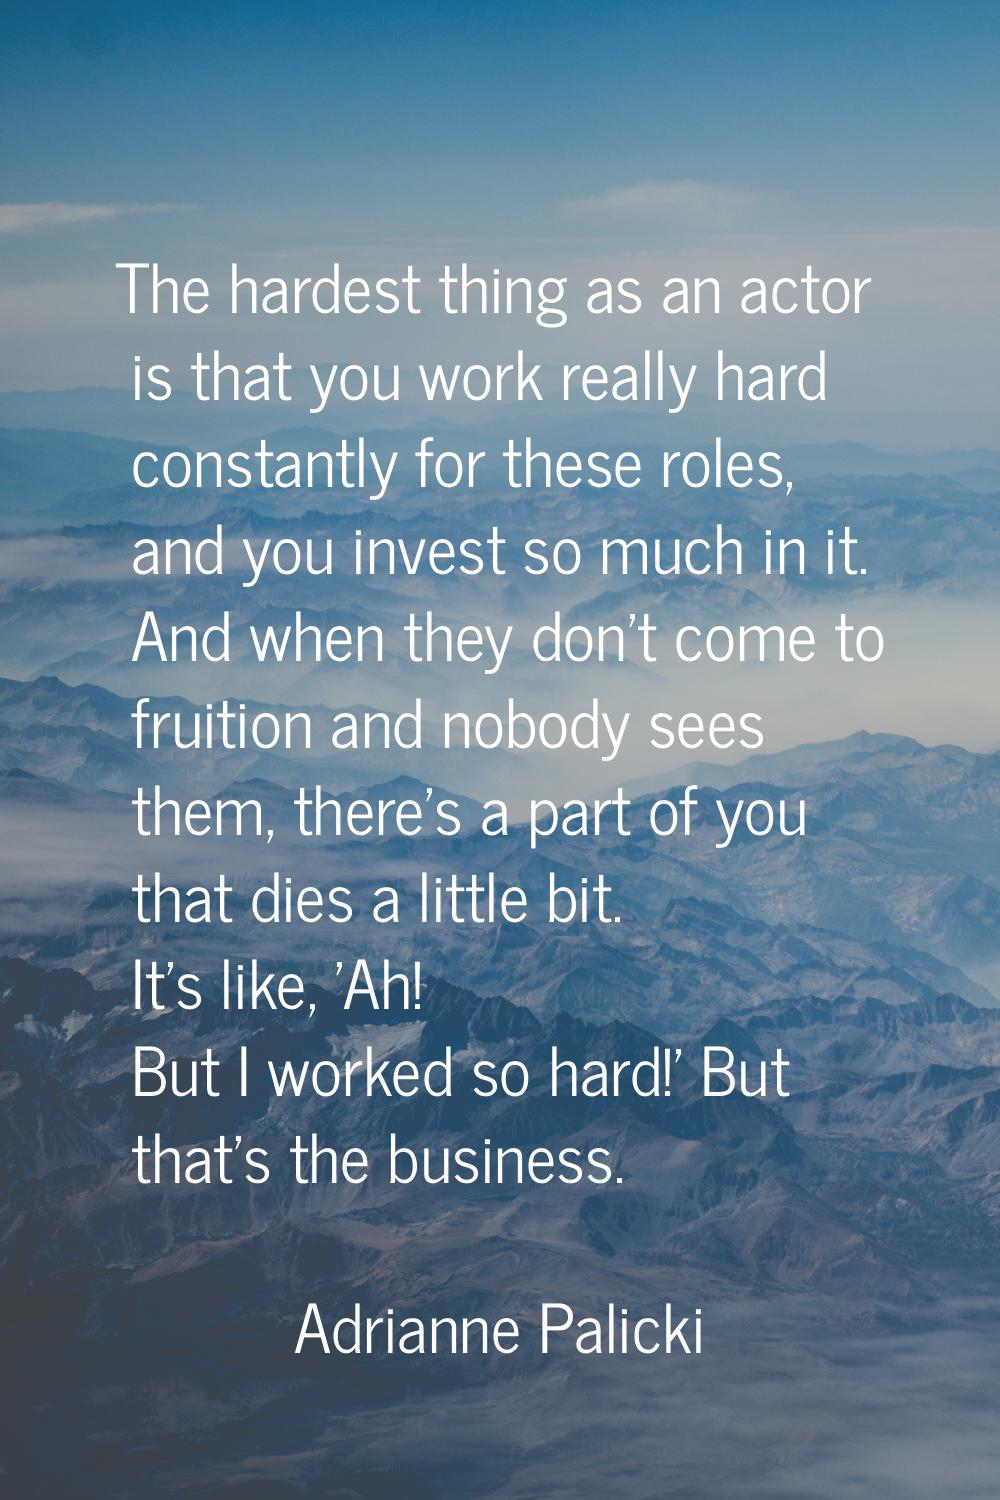 The hardest thing as an actor is that you work really hard constantly for these roles, and you inve